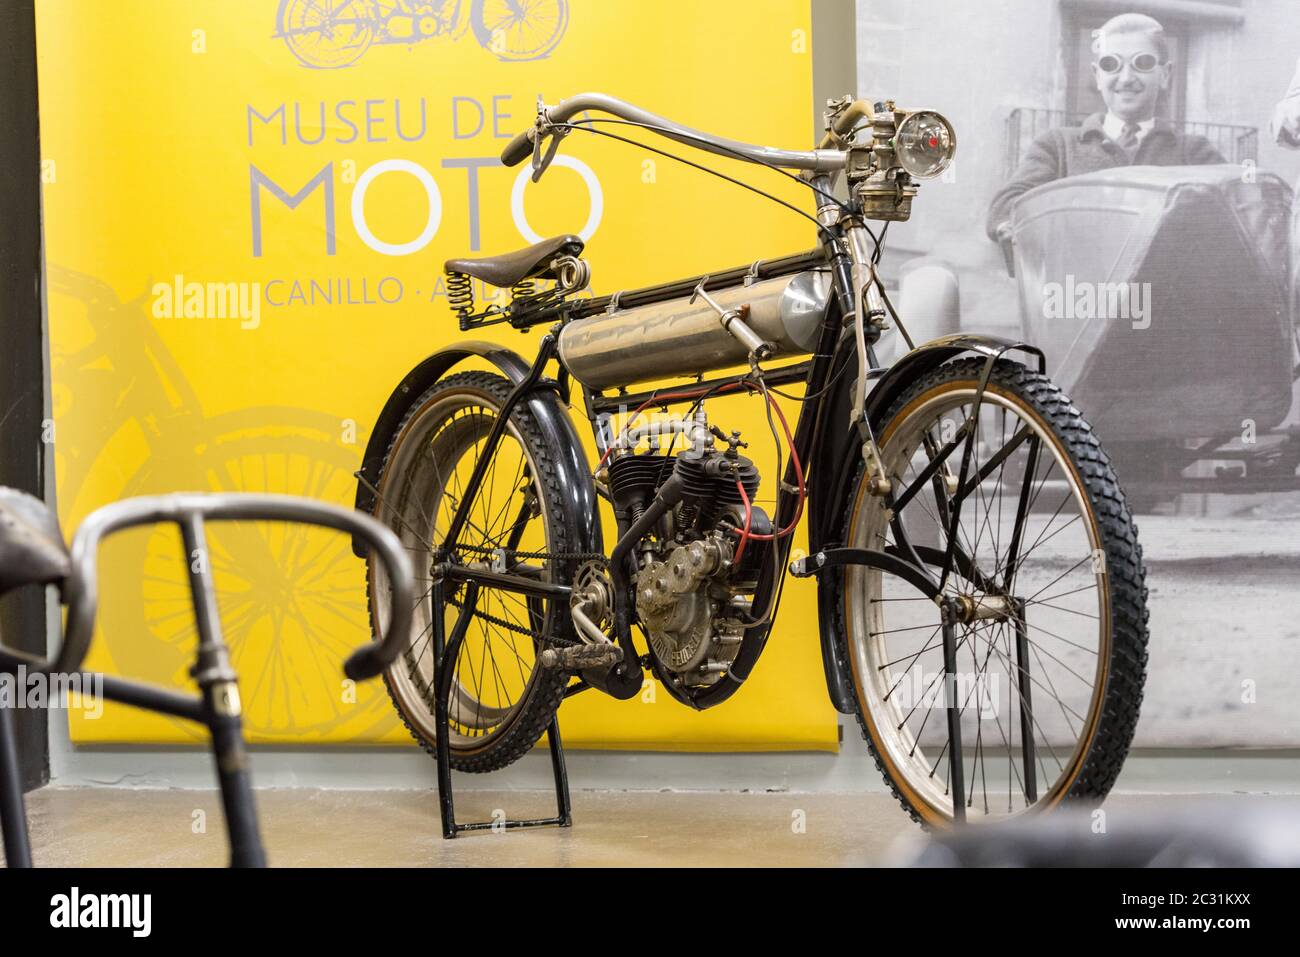 Canillo, Andorra - june 19 2020: Old motorcycles exposed on the Motorcyle  Museum in Canillo, Andorra on June 19, 2020 Stock Photo - Alamy